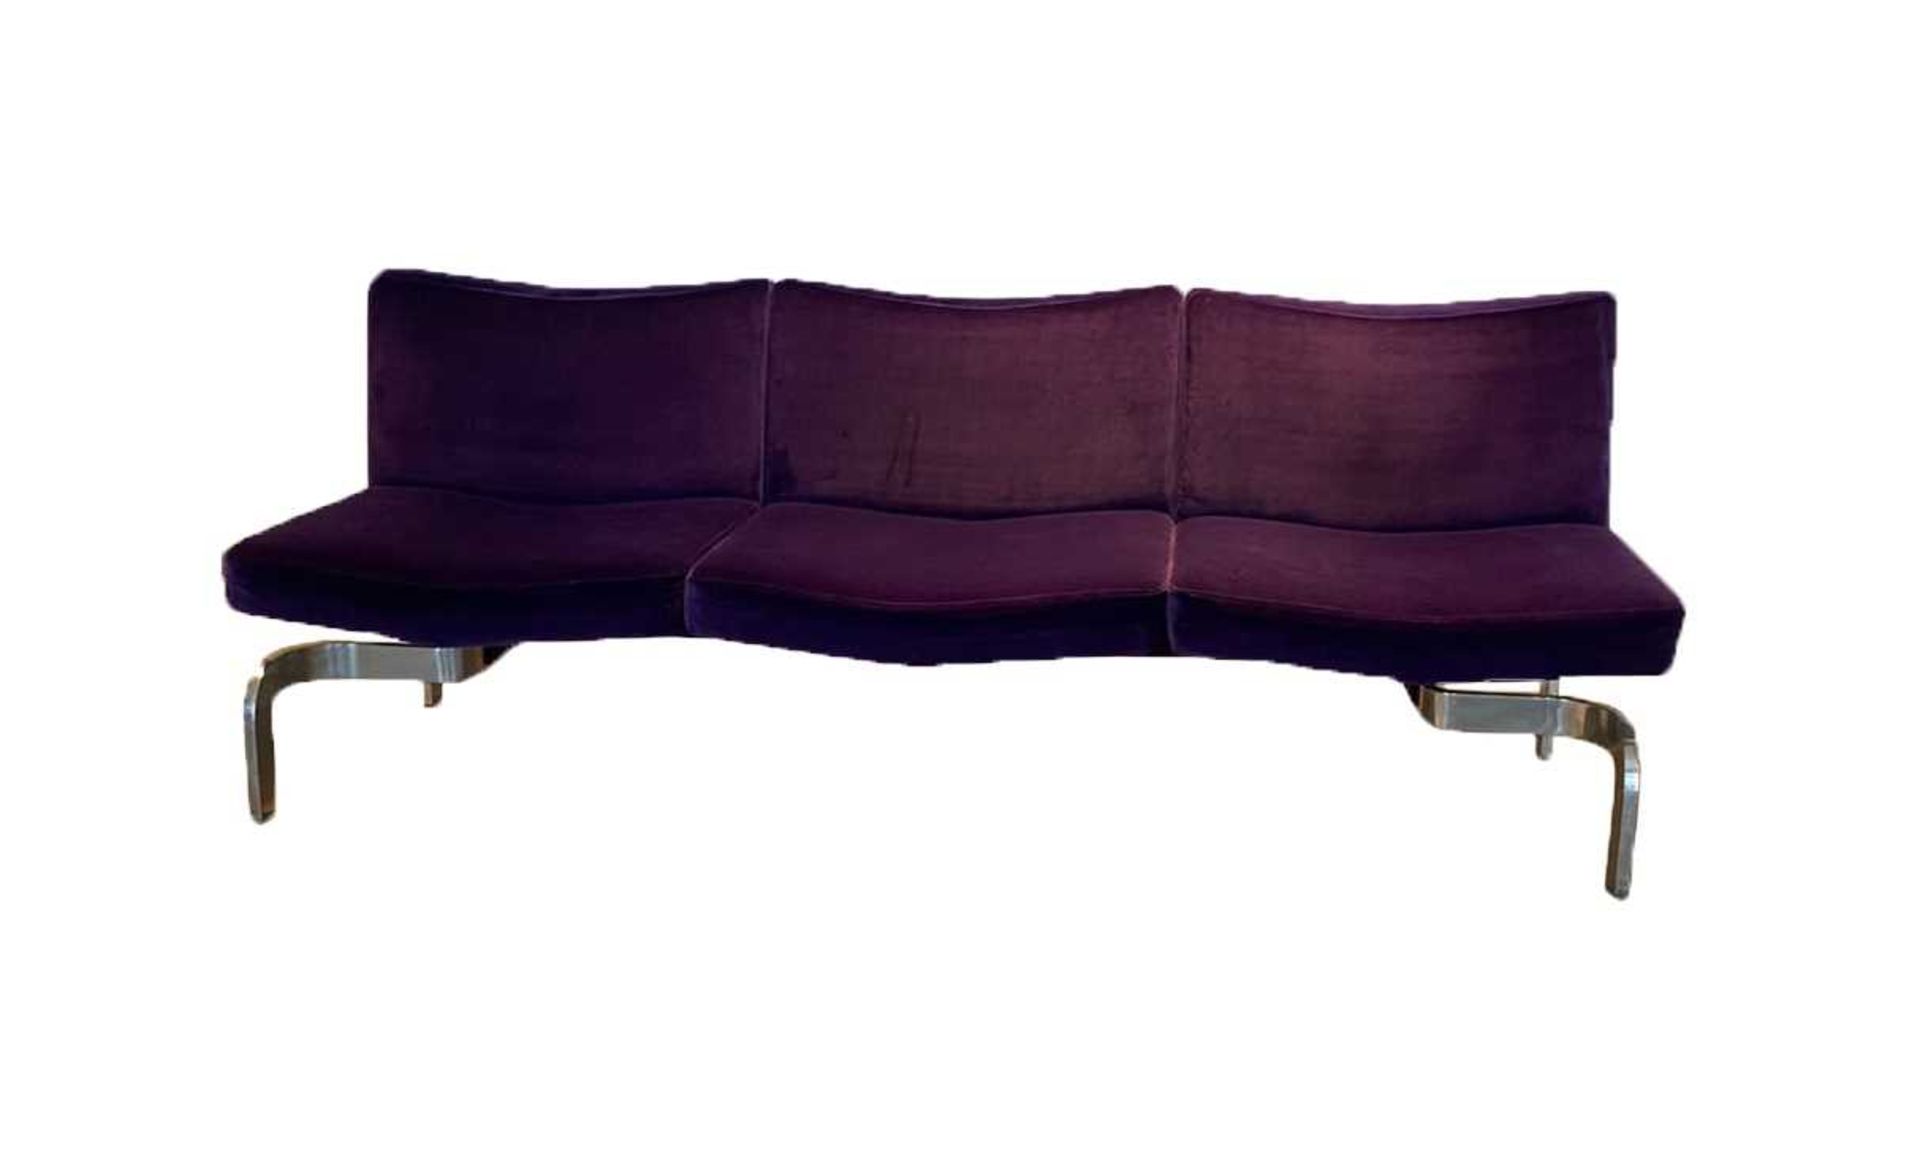 A pair of purple upholstered settees, - Image 2 of 4